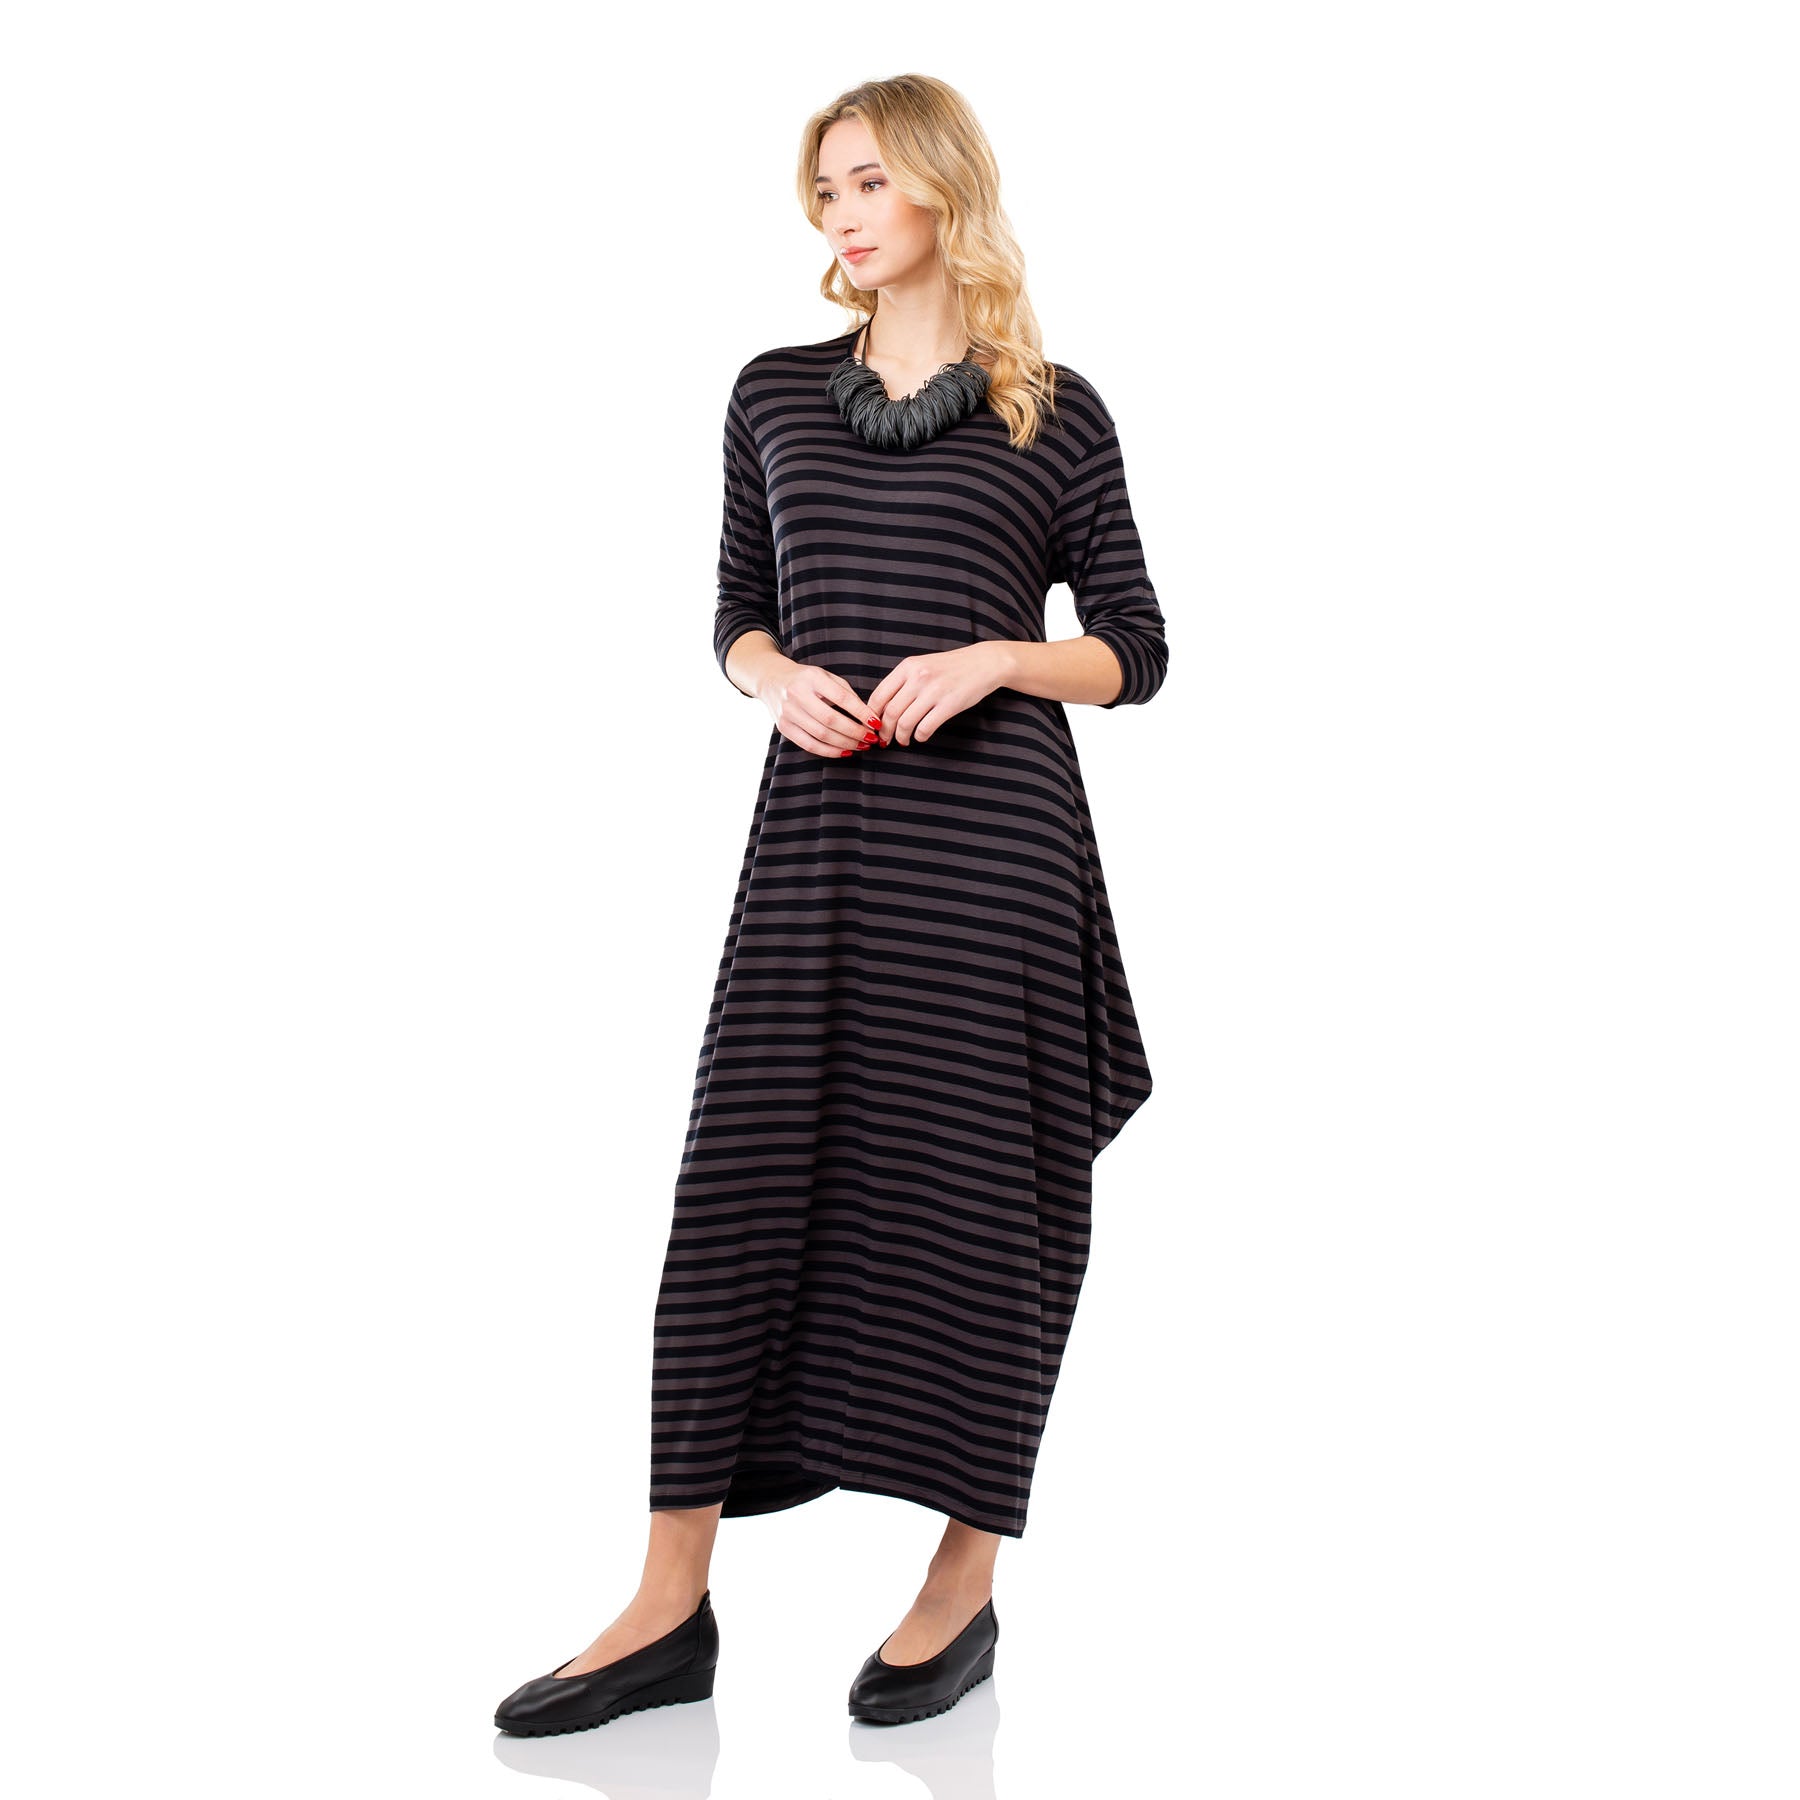 Artemis Dress - Black/Grey Striped - CHIC AND SIMPLE